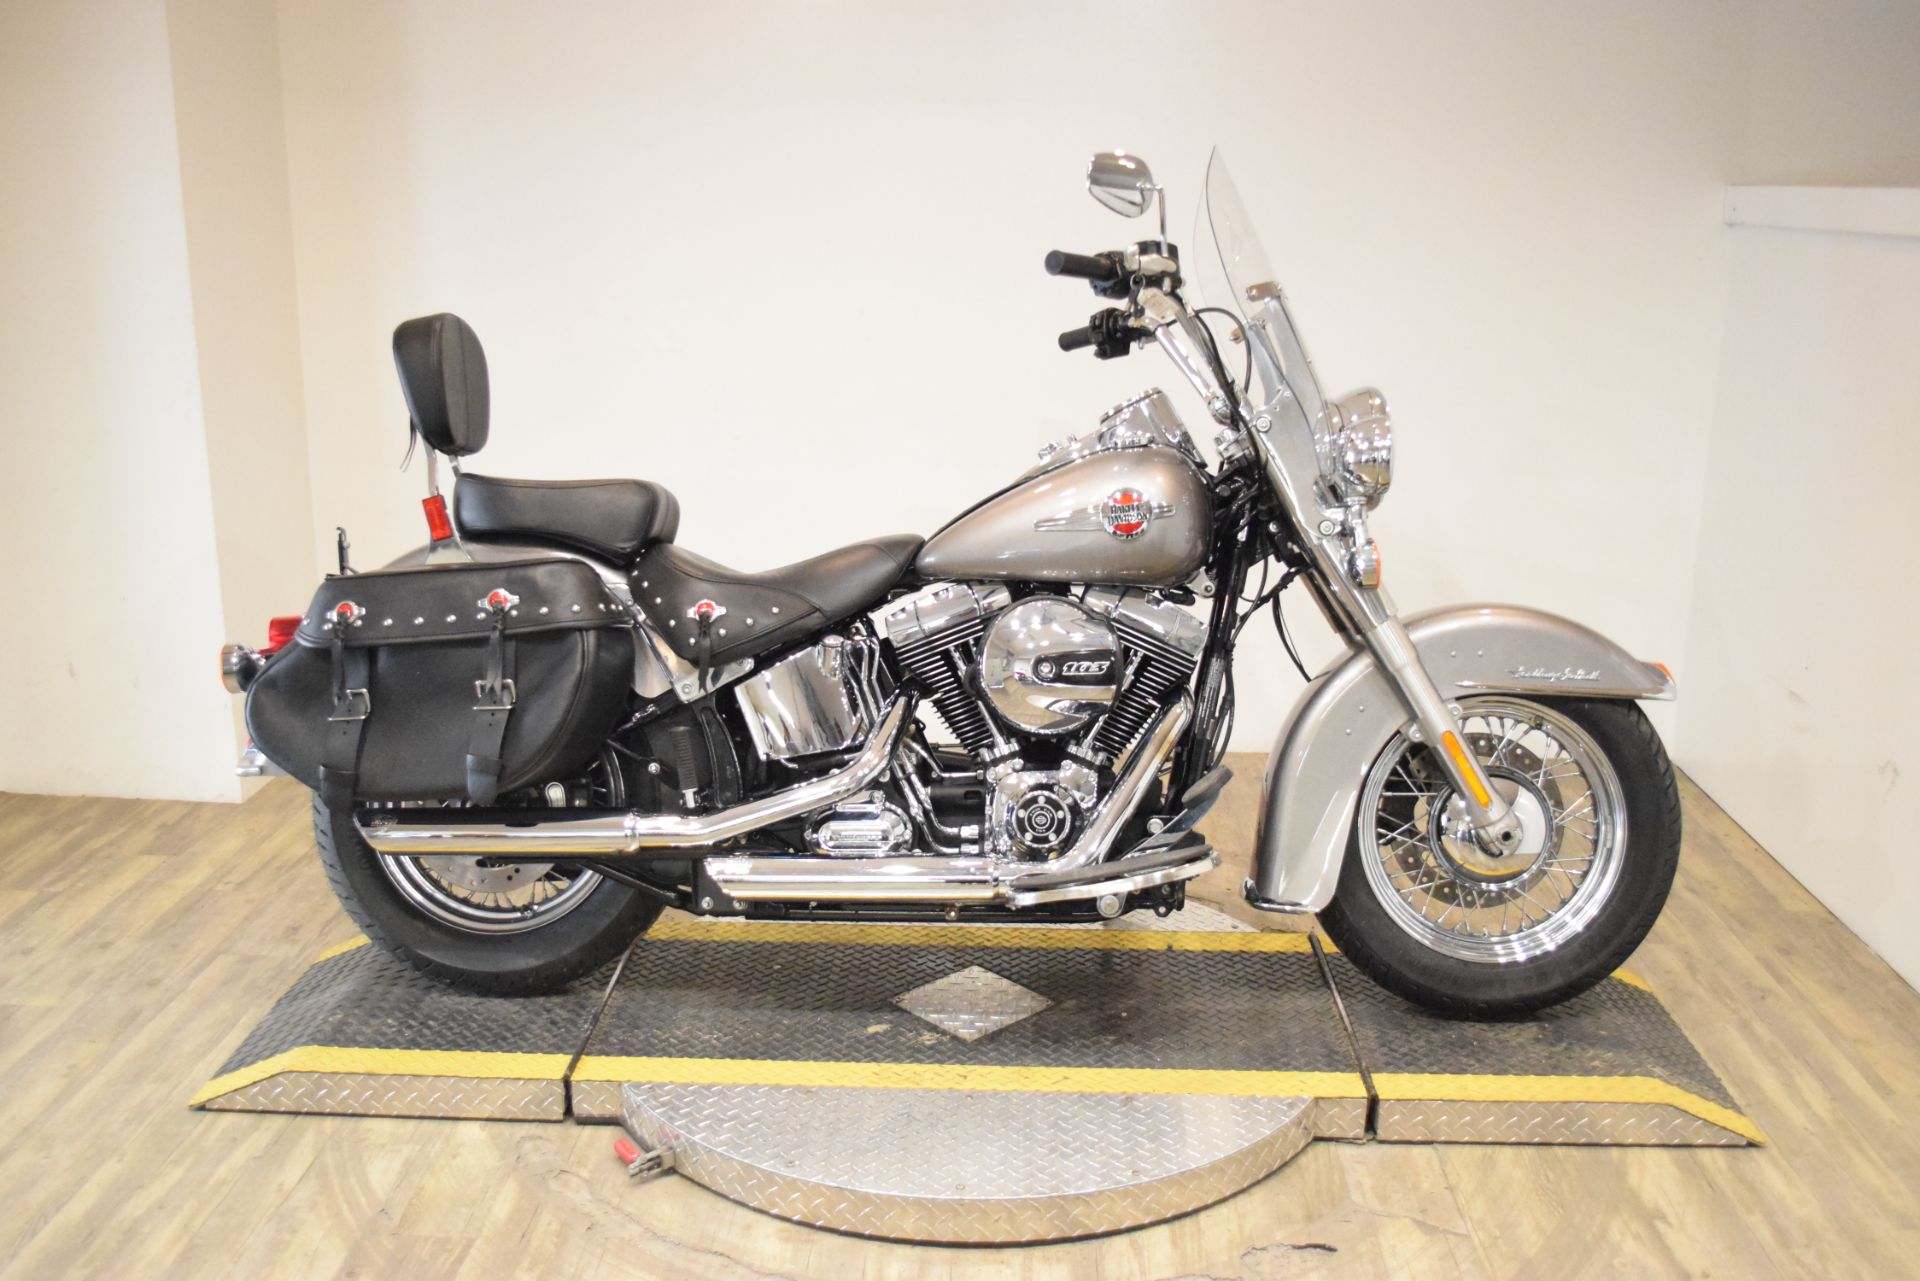 2016 Harley Davidson Heritage Softail Classic Used Motorcycle For Sale Wauconda Illinois